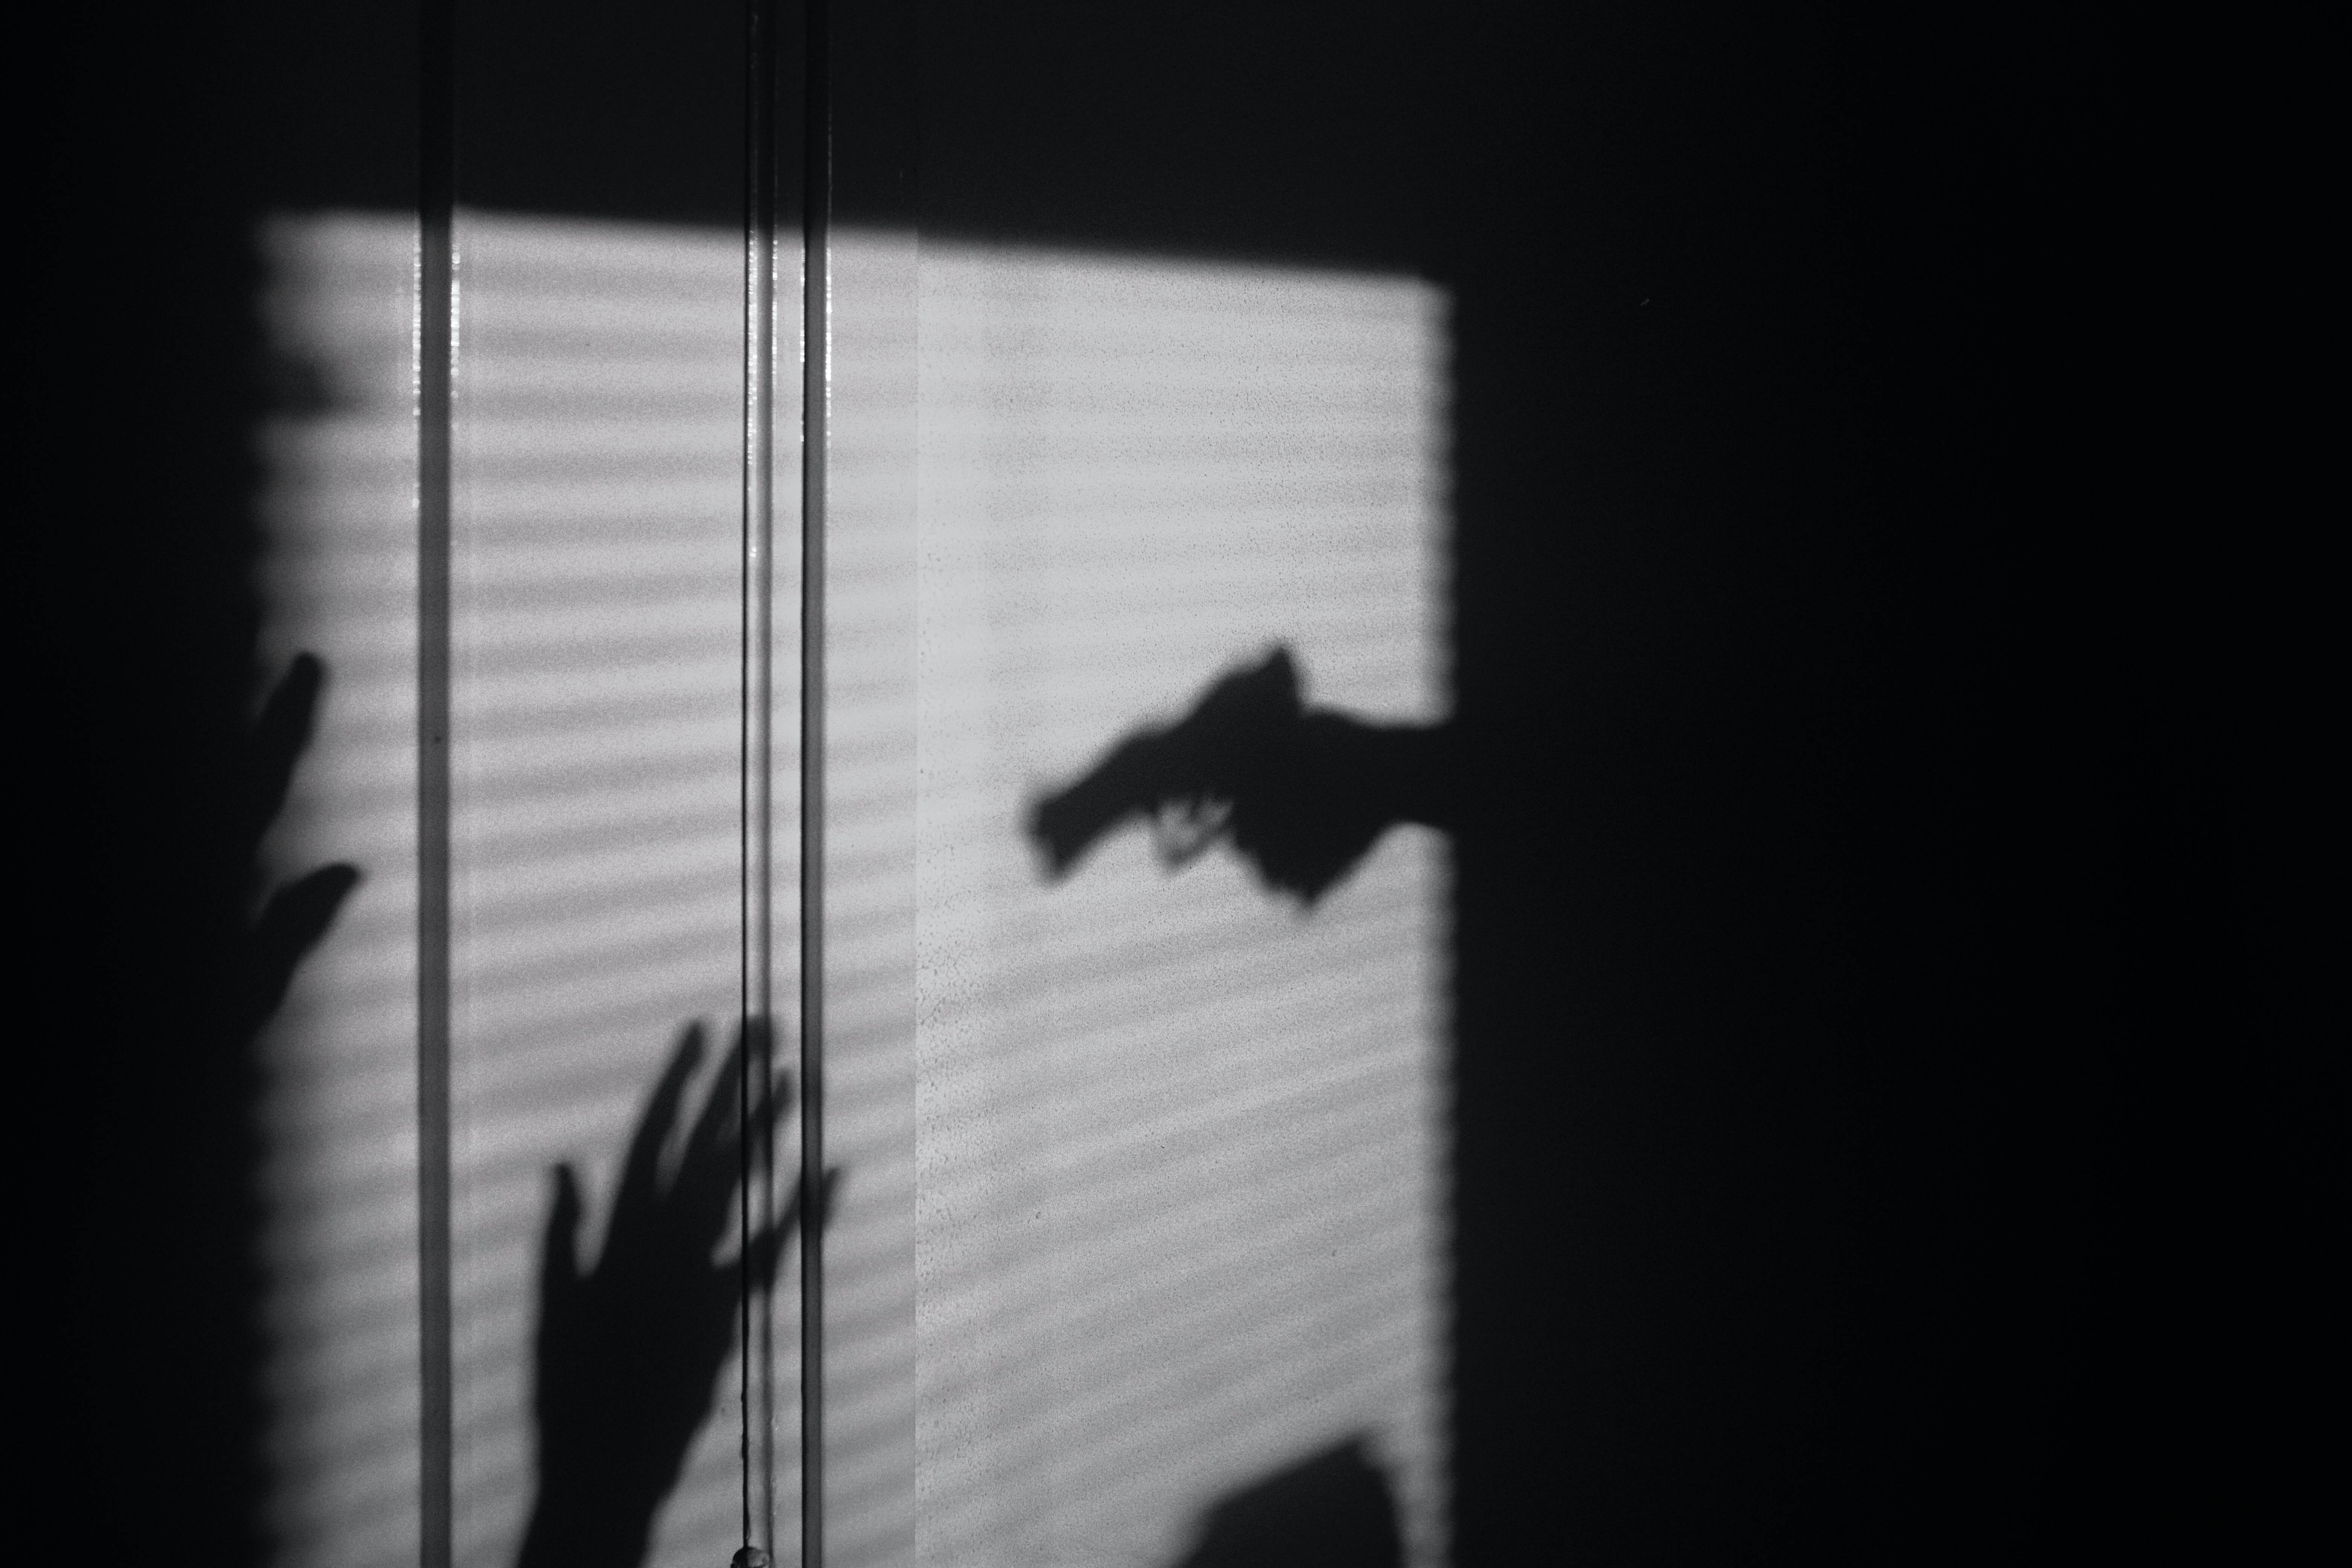 A window of light silhouettes a person holding a gun intimidating another shadowy figure.